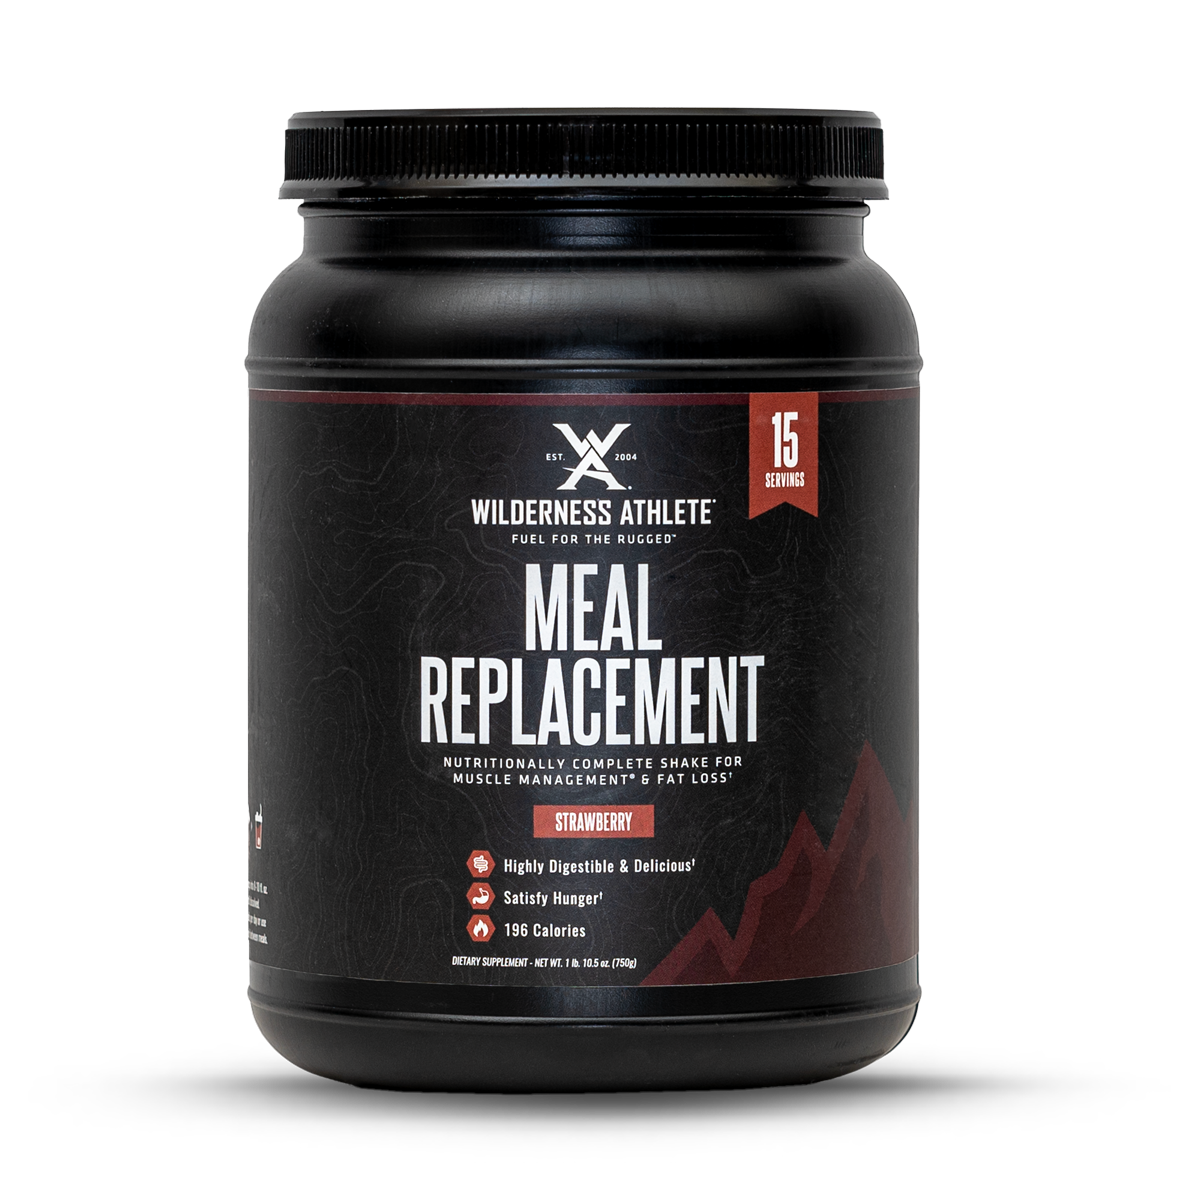 Meal Replacement Protein Powder